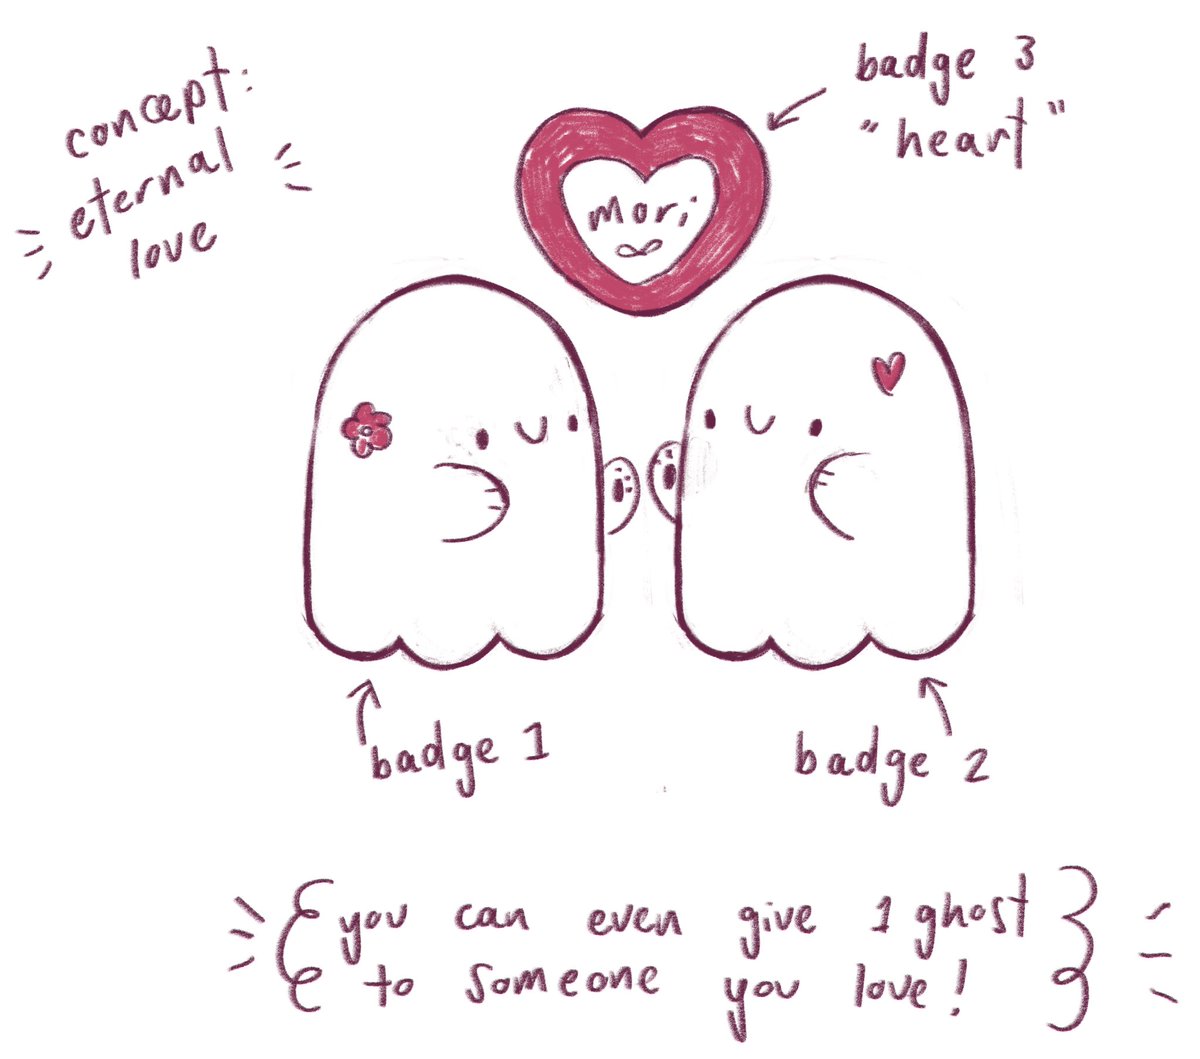 here is a sketch of the october patreon pin pal idea !!! it's two little ghosts hugging eachother plus a heart badge, with the concept of 'eternal love' - you can even give one ghost to someone you love, like a couples/friendship badge pair!! <3 